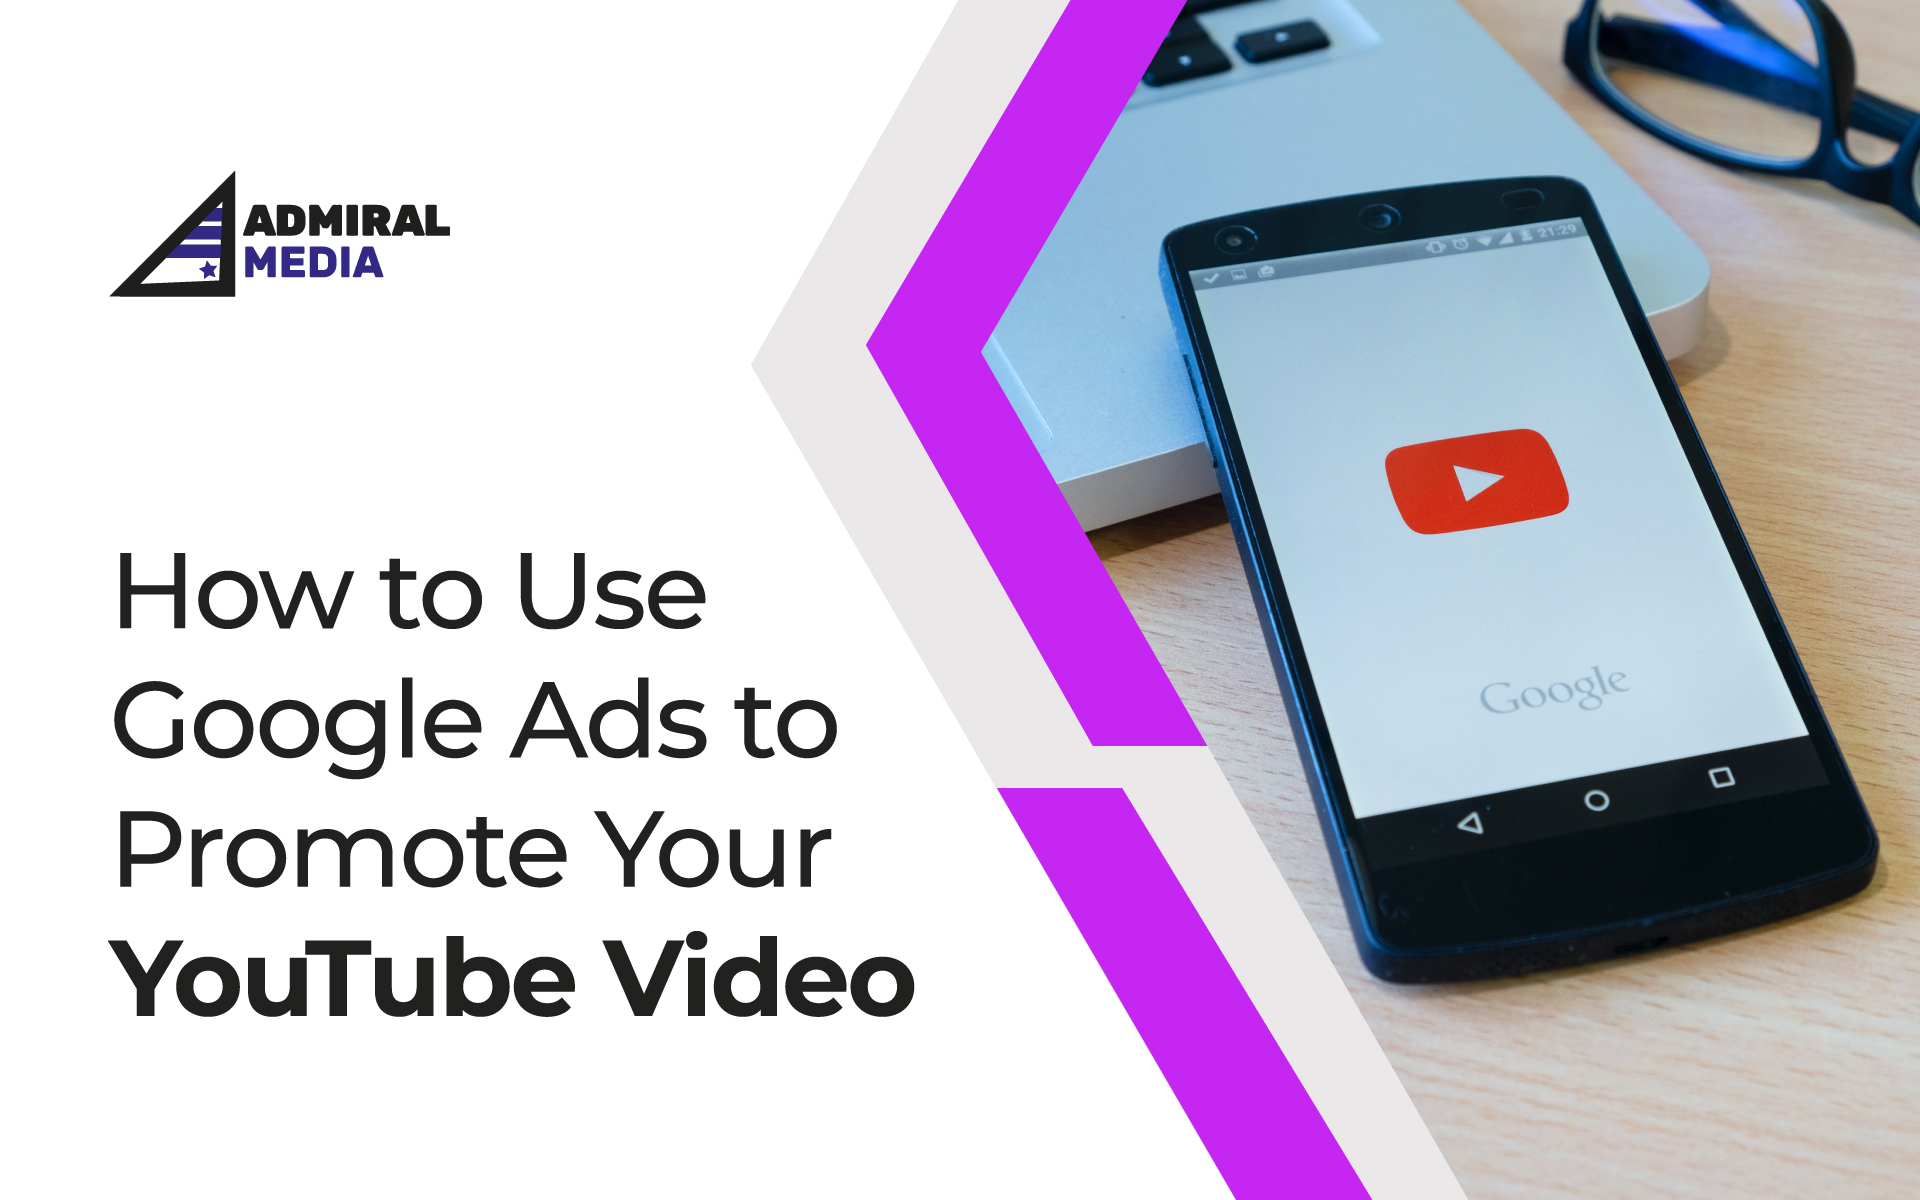 How to Use Google Ads to Promote Your YouTube Video